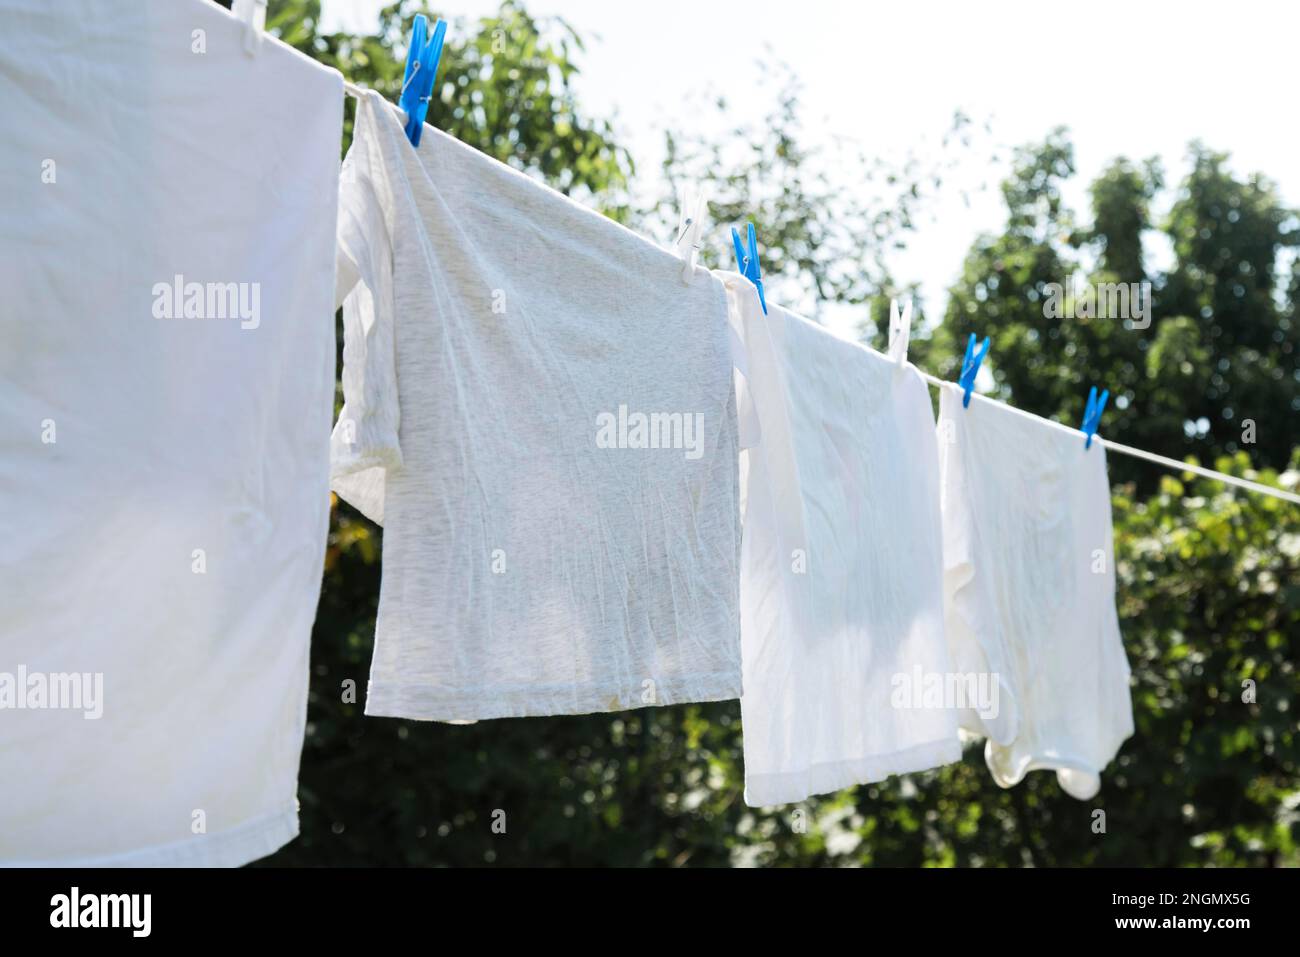 White laundry hanging string outdoors Stock Photo